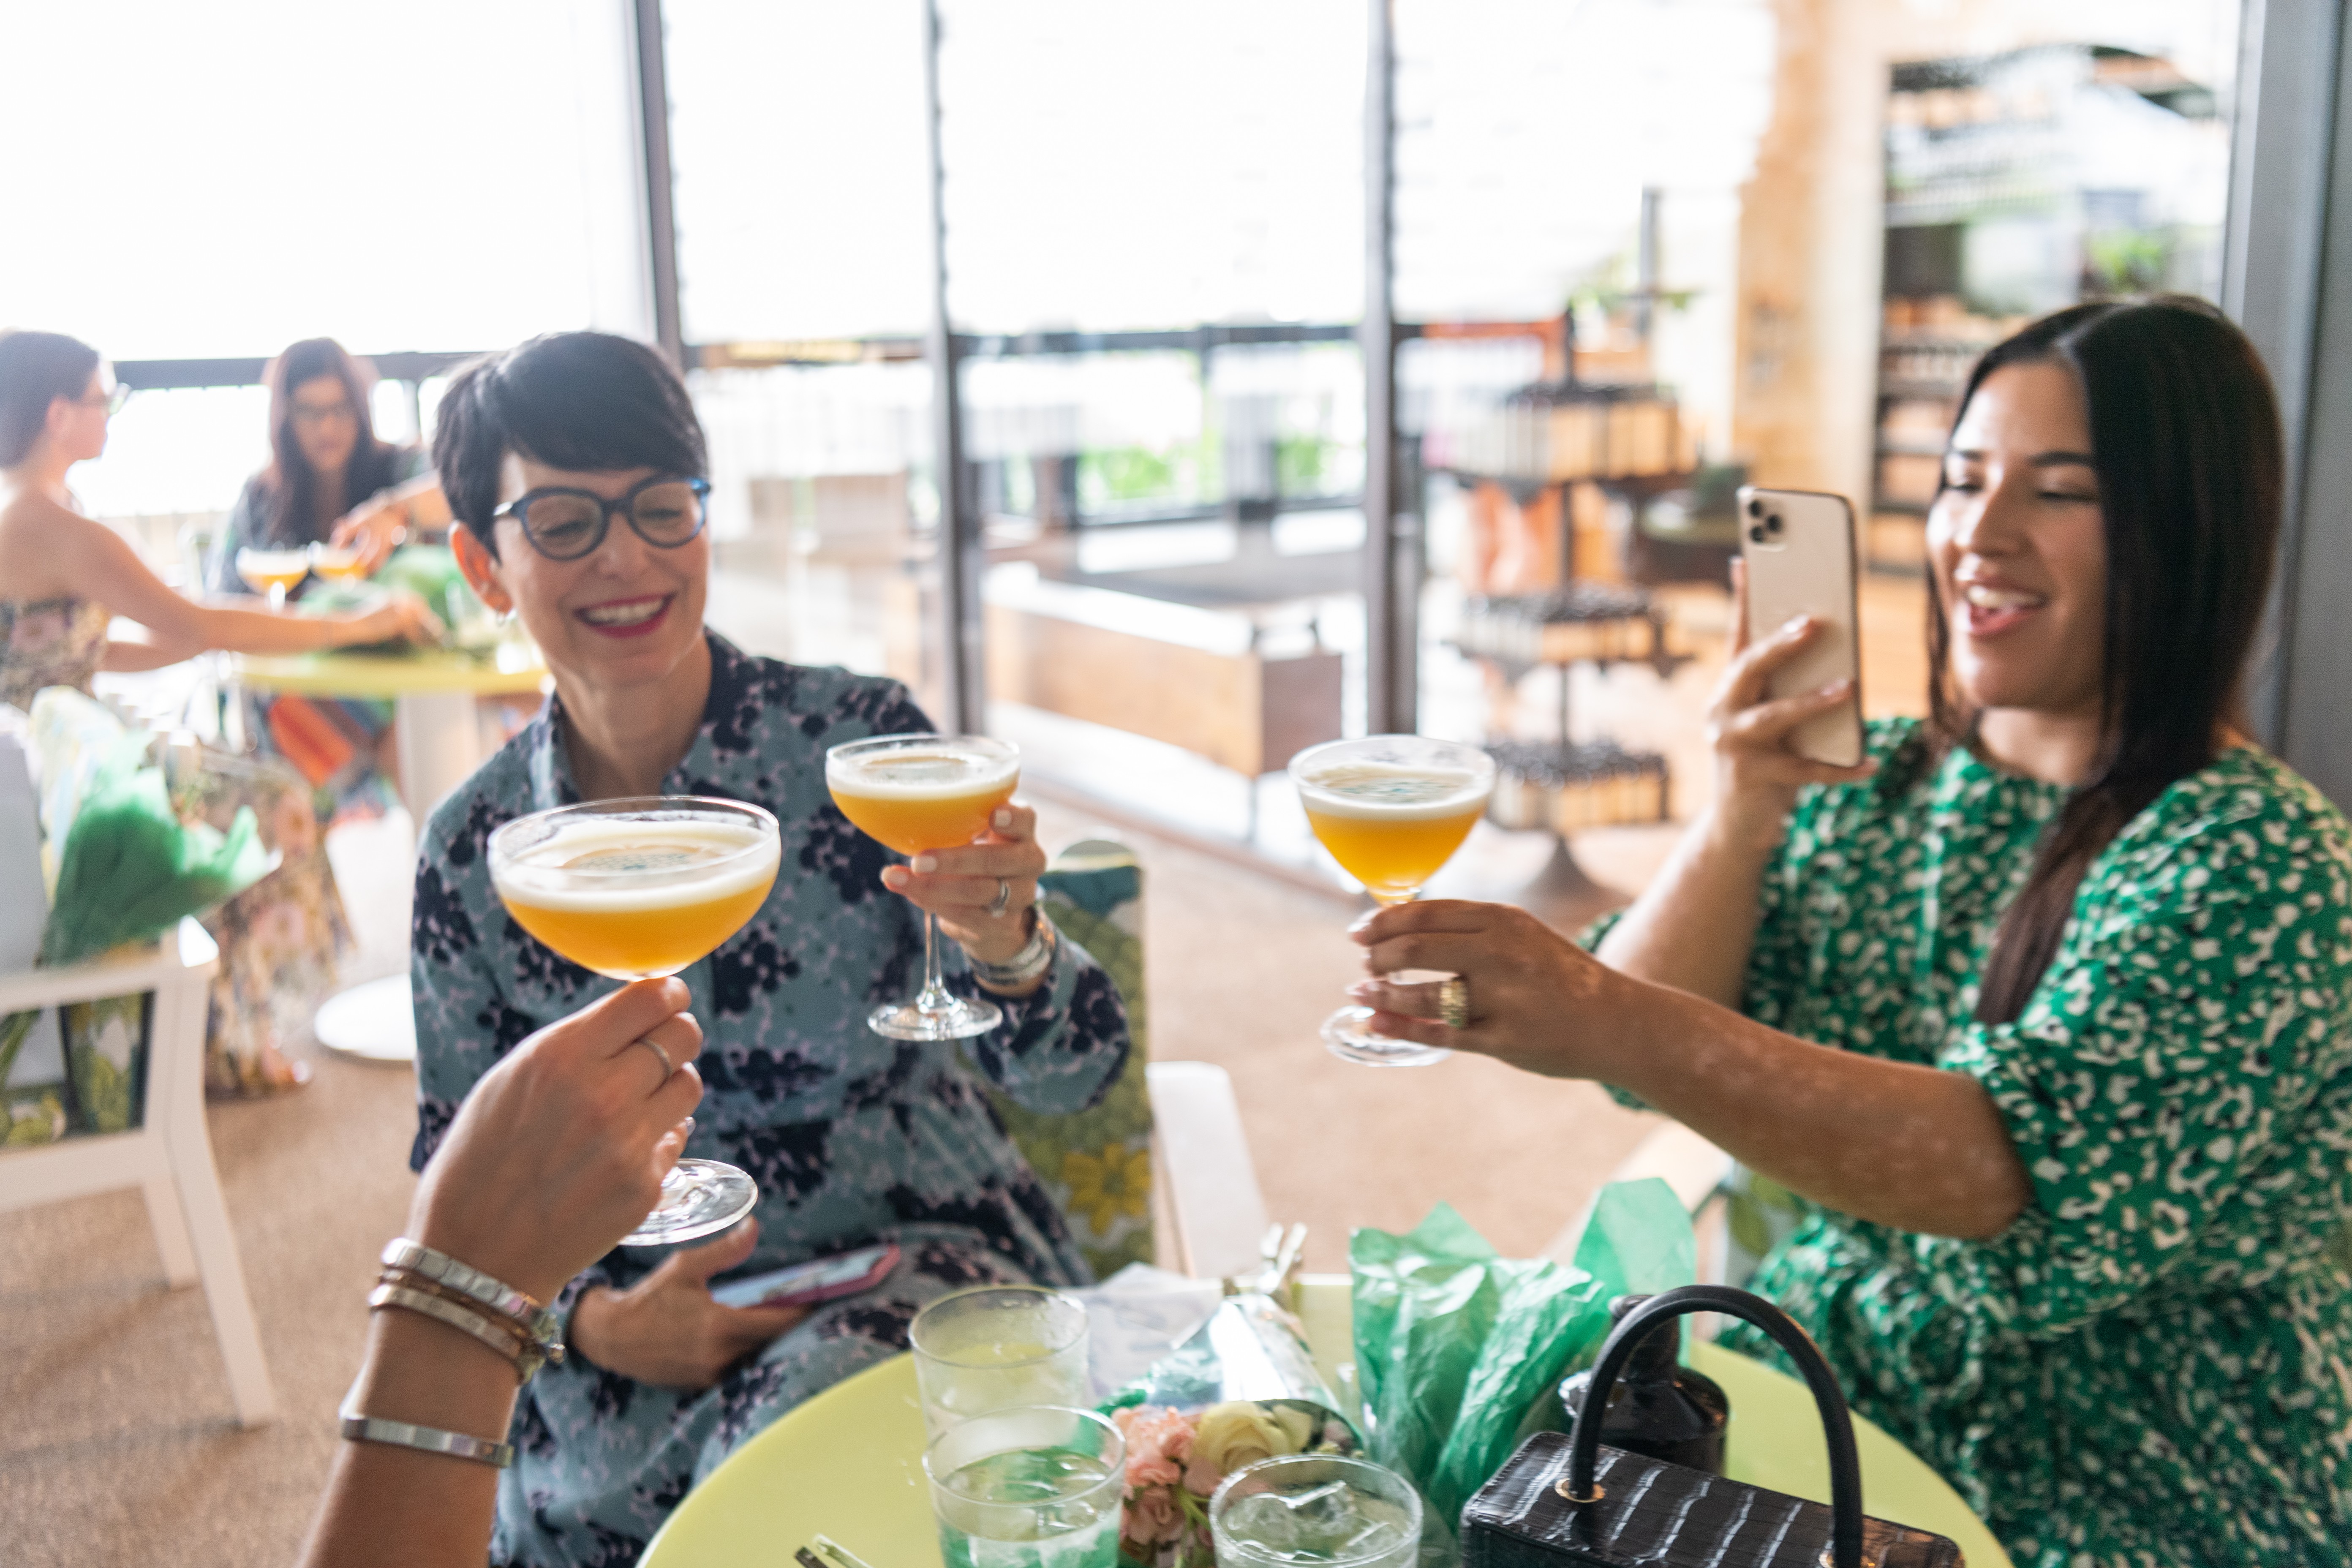 Three women cheers their cocktails while one woman takes a photo